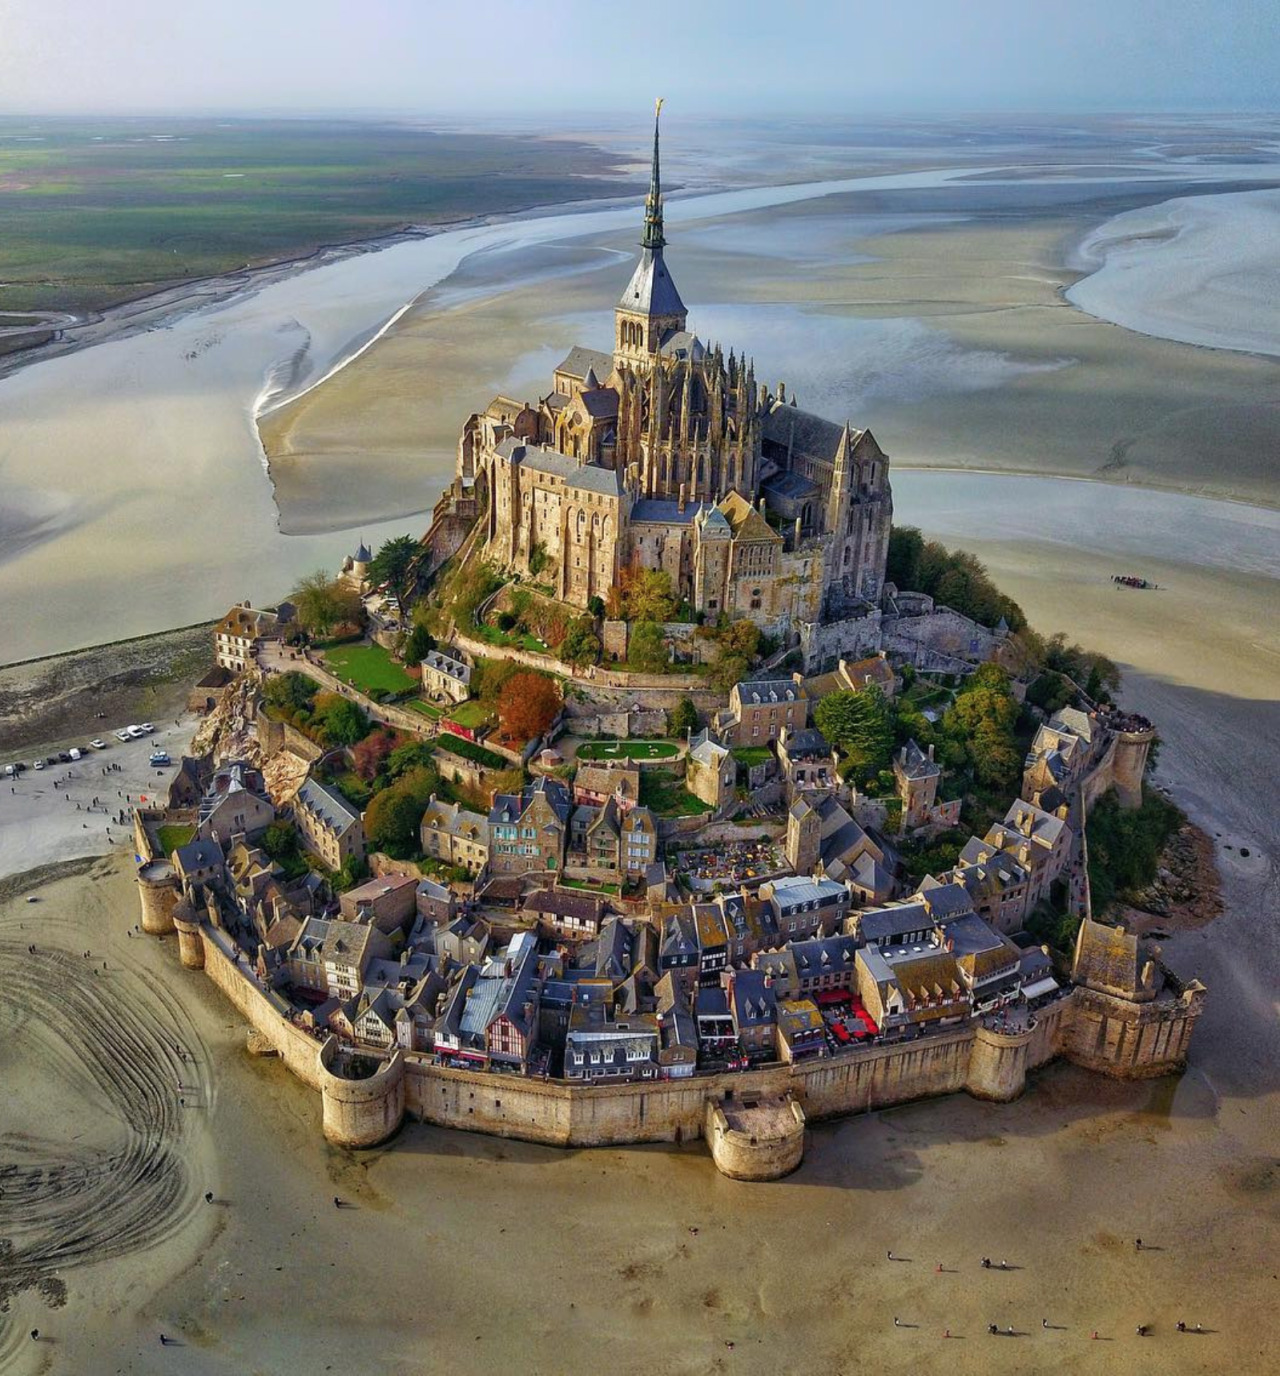 dailyoverview: Check out this incredible shot of Mont St. Michel in Normandy, France.